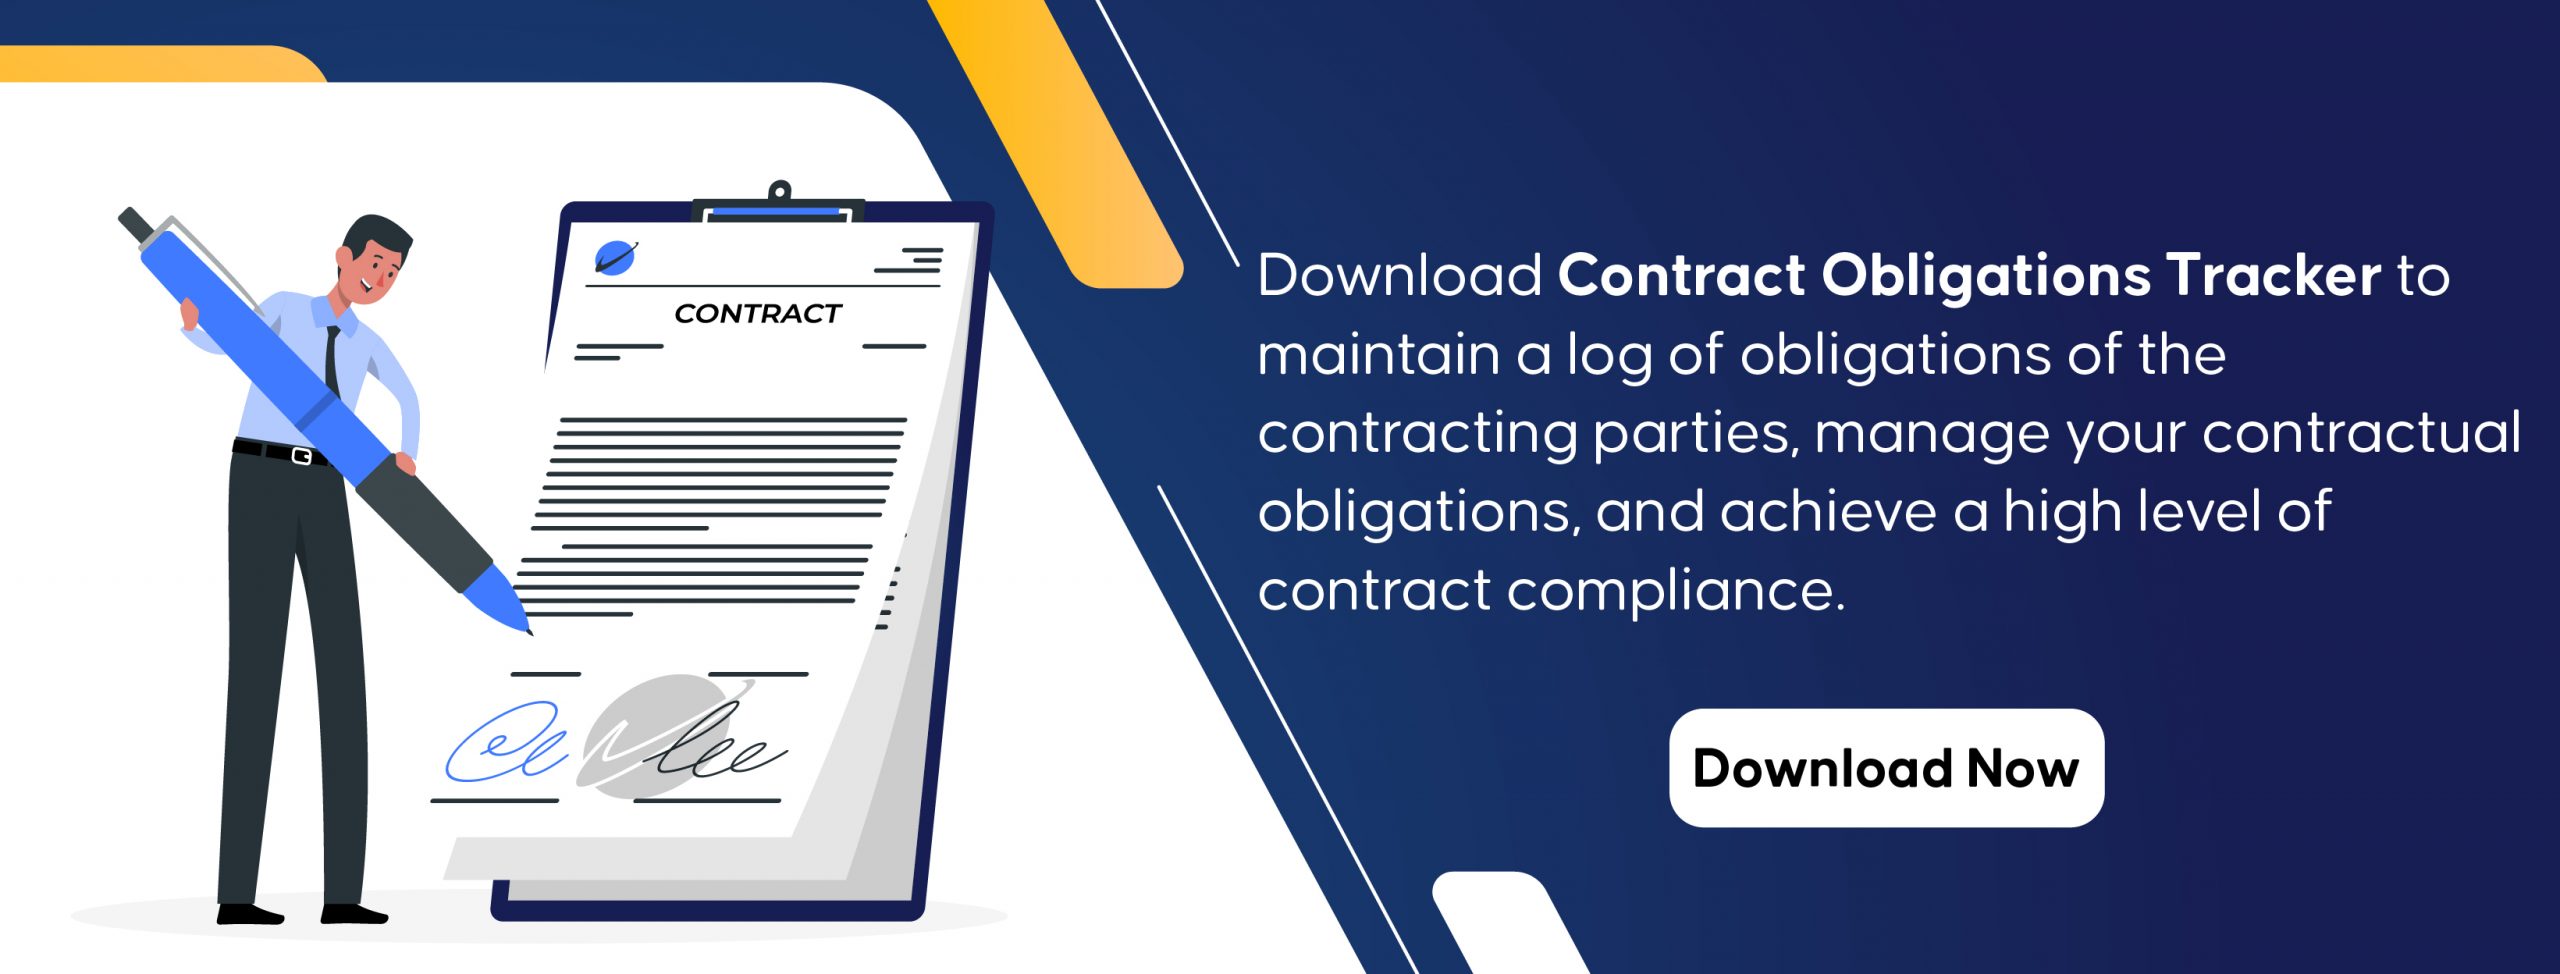 Contractual Obligation Management Software Managing Contract